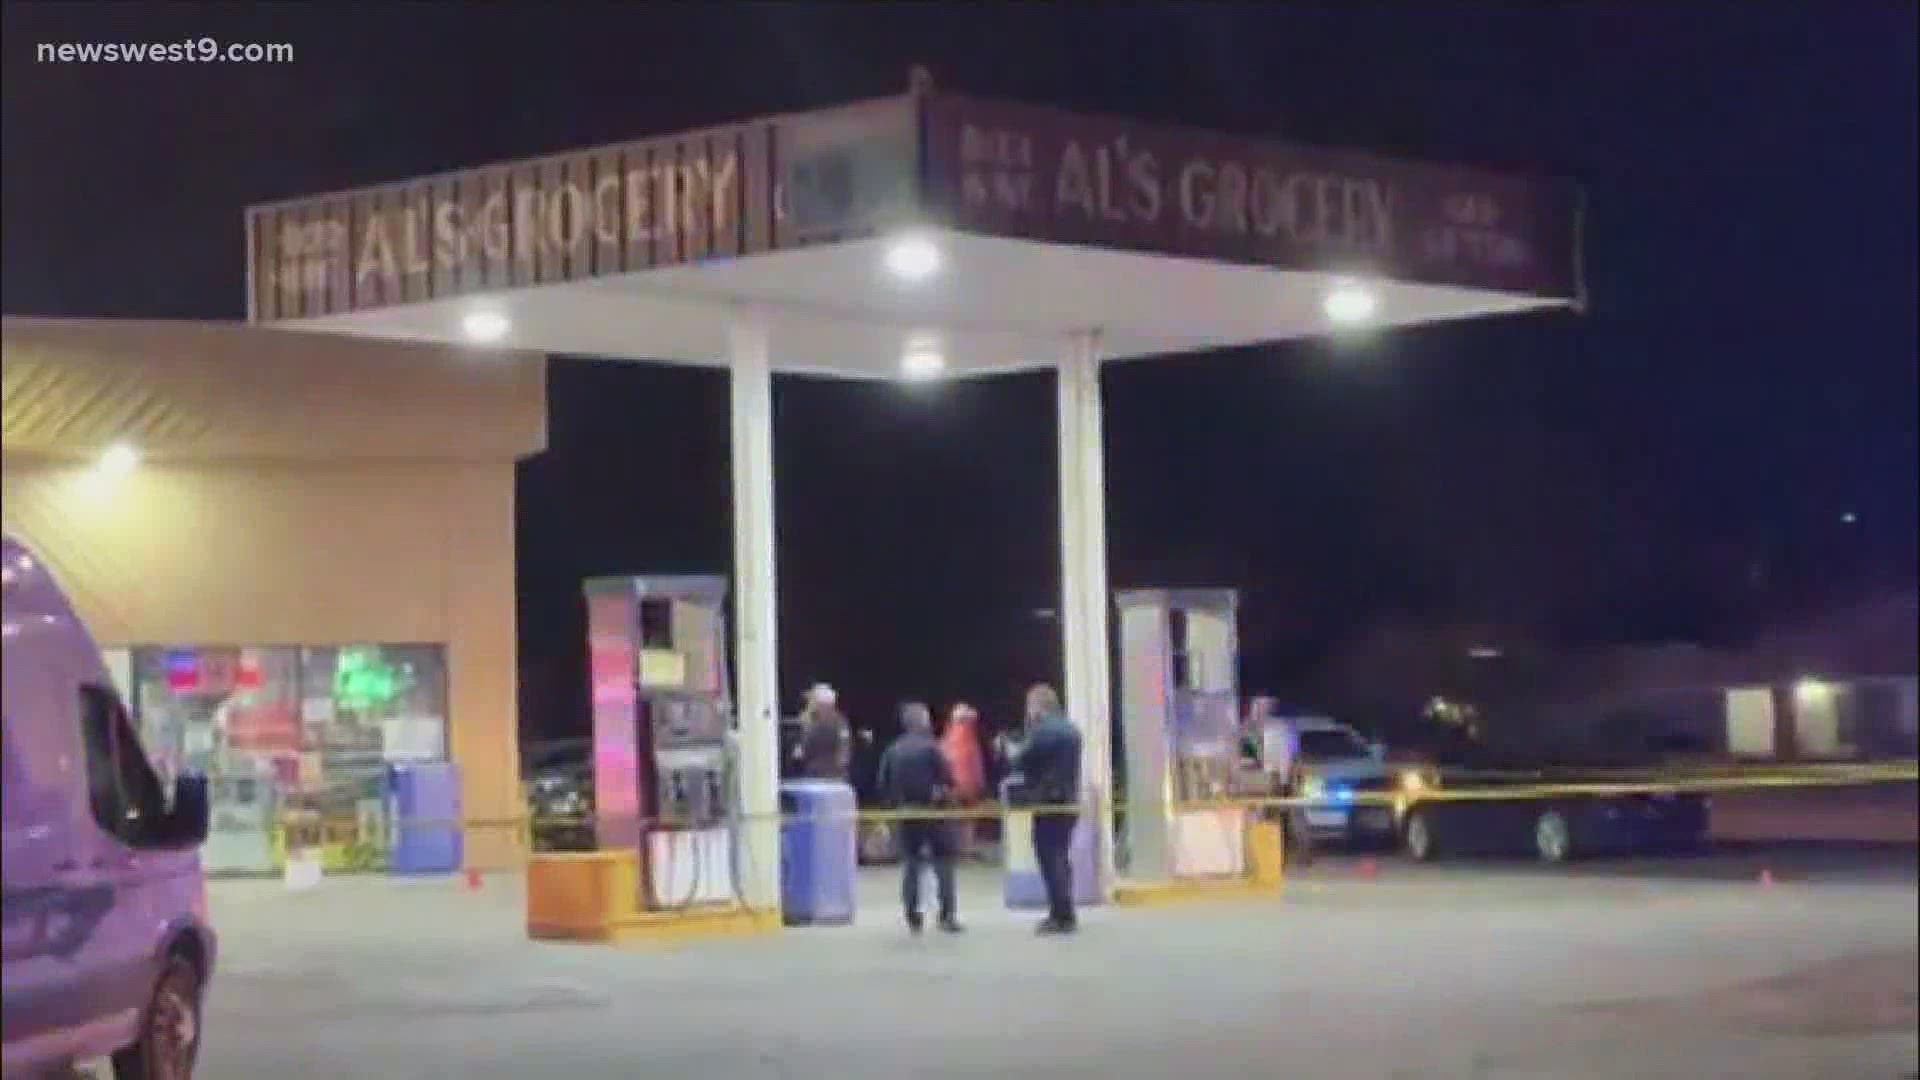 Midland Police confirm two teens were shot at Al's Grocery Sunday evening. Witnesses say the shooter ran away, jumping fences and running through nearby backyards.